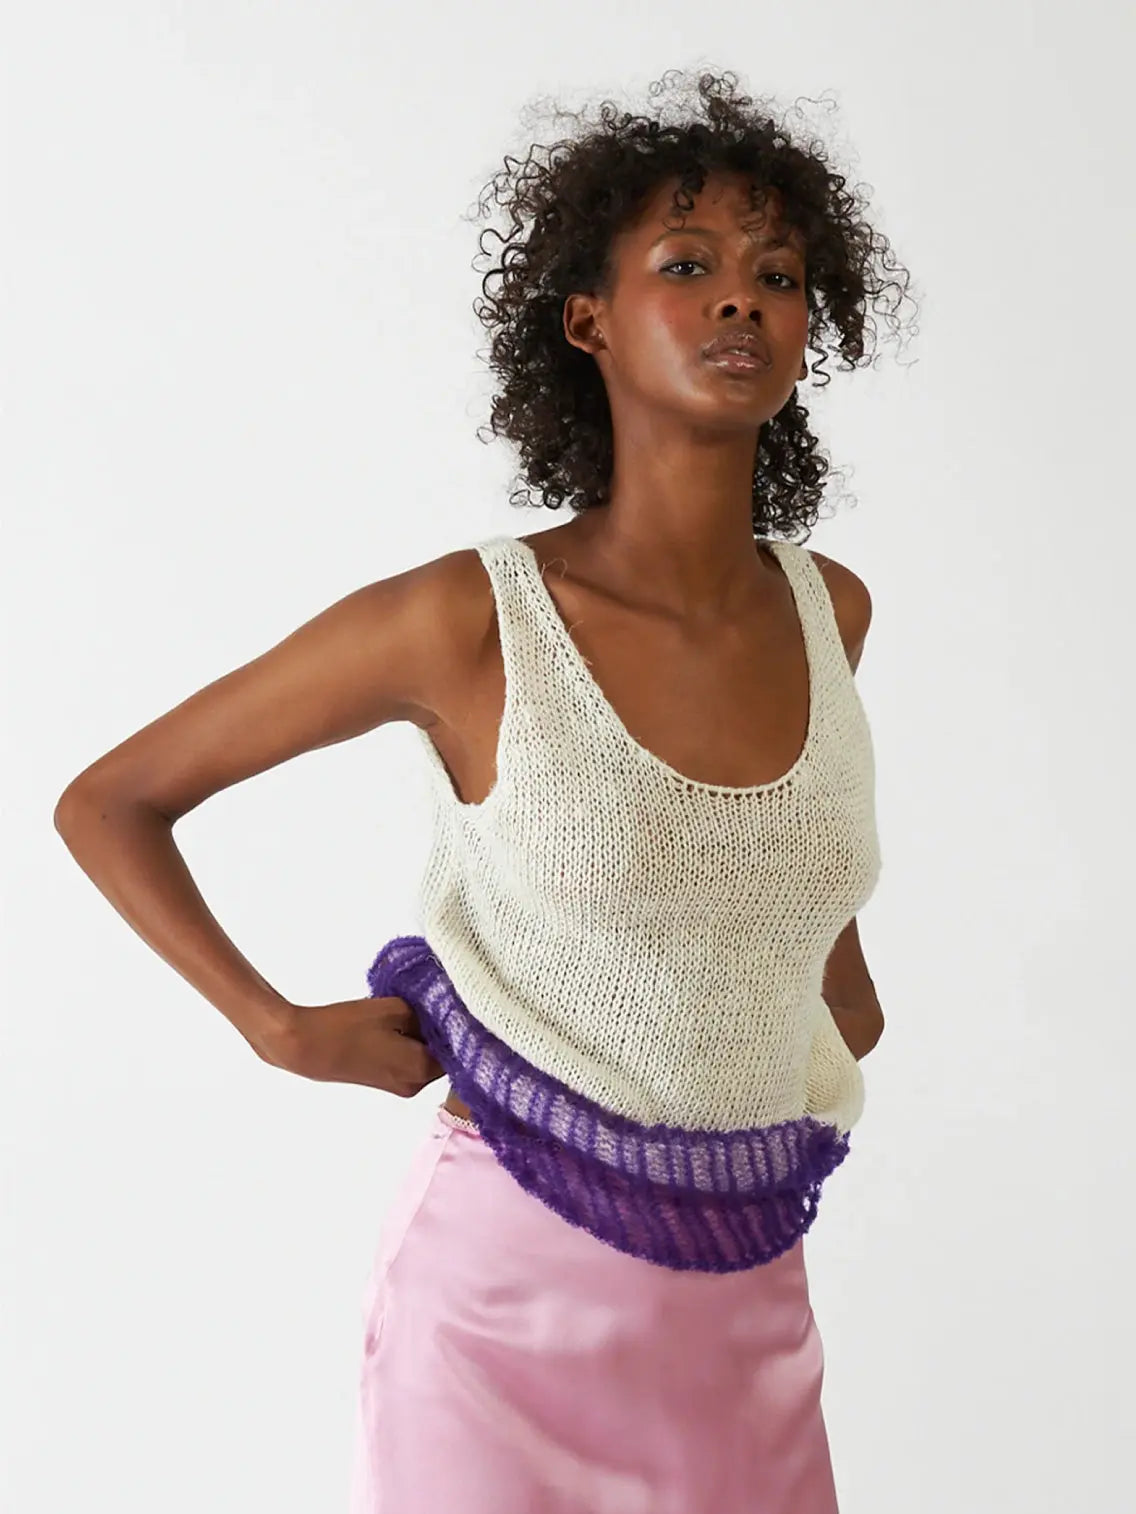 A person with curly hair is wearing a sleeveless, scoop-neck, off-white knit top with a purple ruffle at the bottom. They also have on a light pink satin skirt and are posing against a plain white background, showcasing chic fashion available at bassalstore in Barcelona. The featured top is the Flin Top Purple by Bielo.